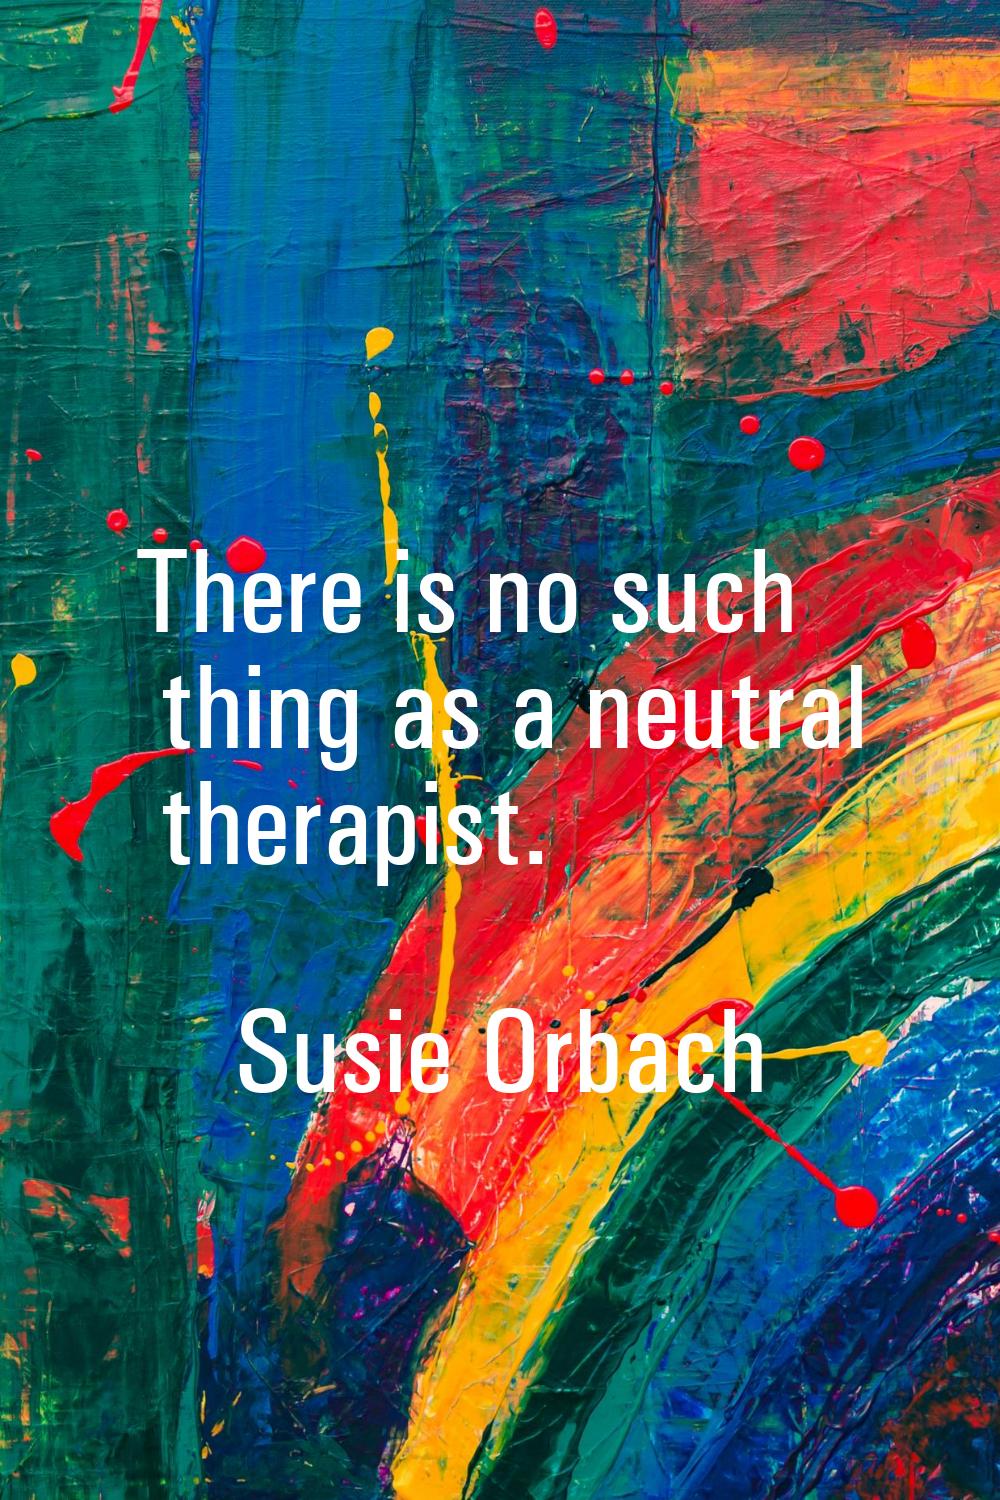 There is no such thing as a neutral therapist.